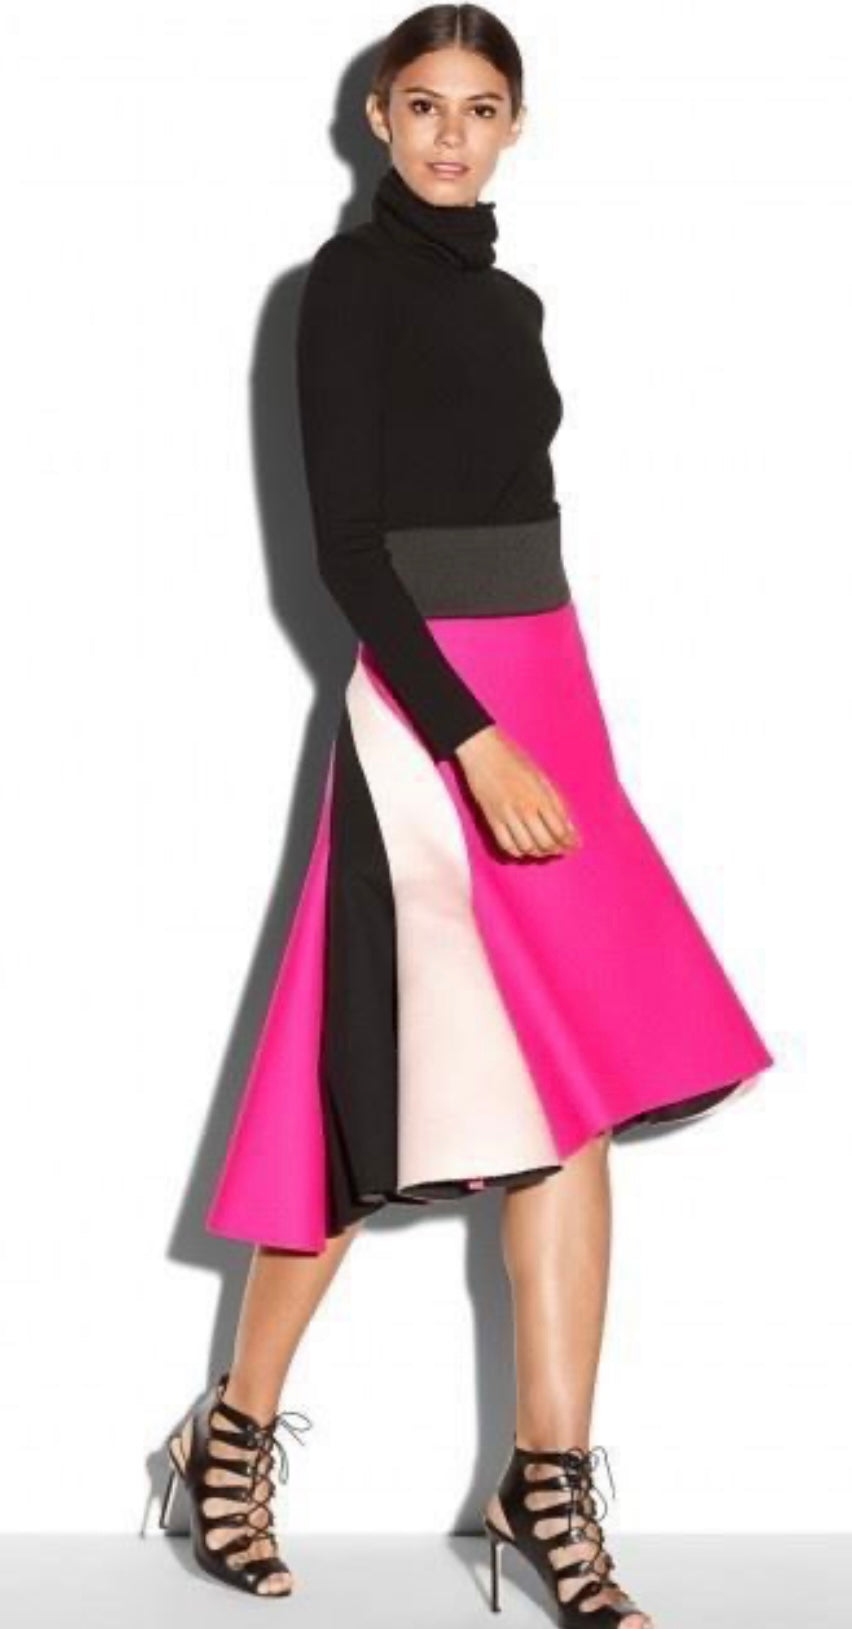 MILLY - Asymmetric melton wool-blend and satin Colorblock skirt